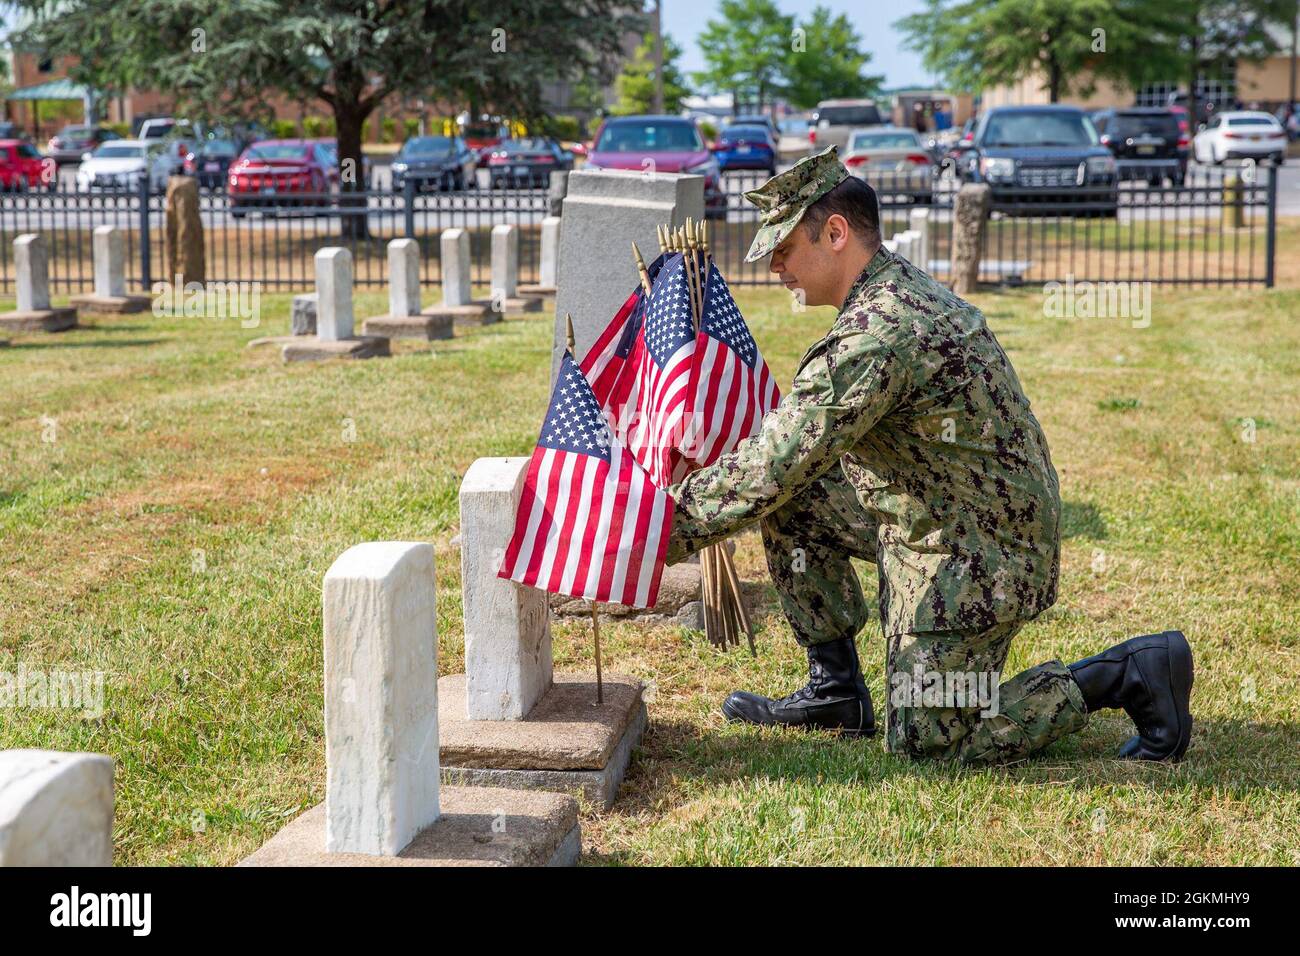 A Sailor stationed at Naval Support Activity Hampton Roads Portsmouth places flags on the graves of fallen service members during the annual flag placement ceremony at the Captain Ted Conaway Memorial Naval Cemetery in Naval Medical Center Portsmouth (NMCP) May 27. Stock Photo